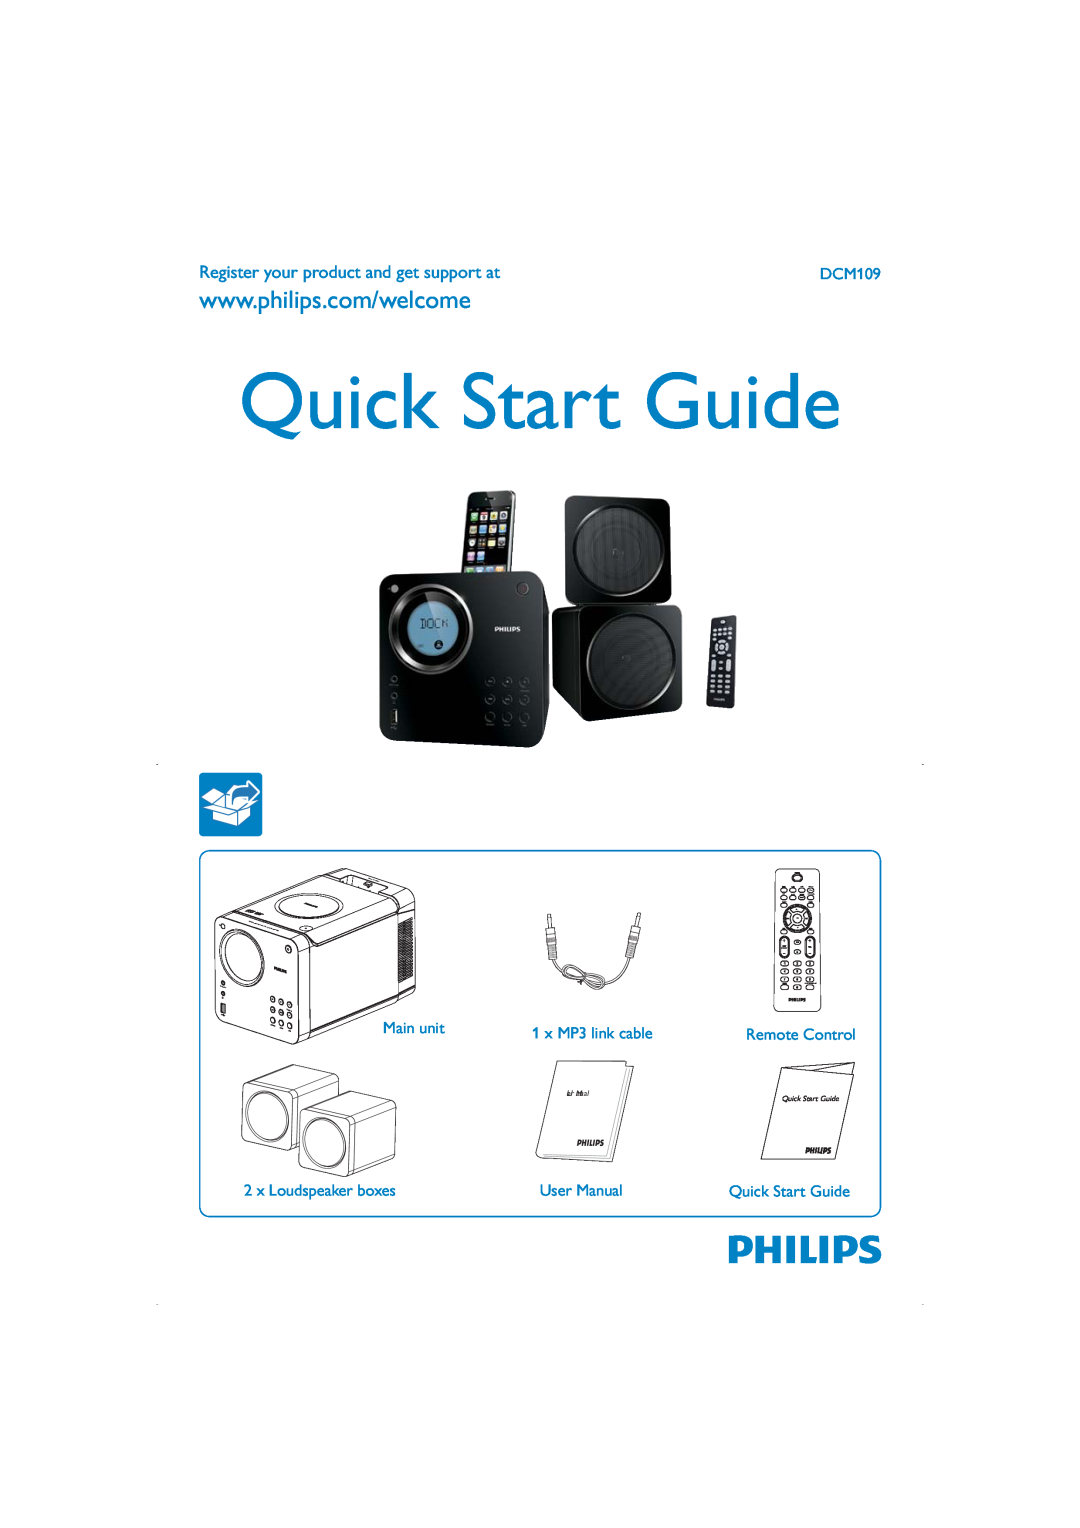 Philips DCM109/37 quick start Register your product and get support at, x Loudspeaker boxes, Quick Start Guide, Main unit 